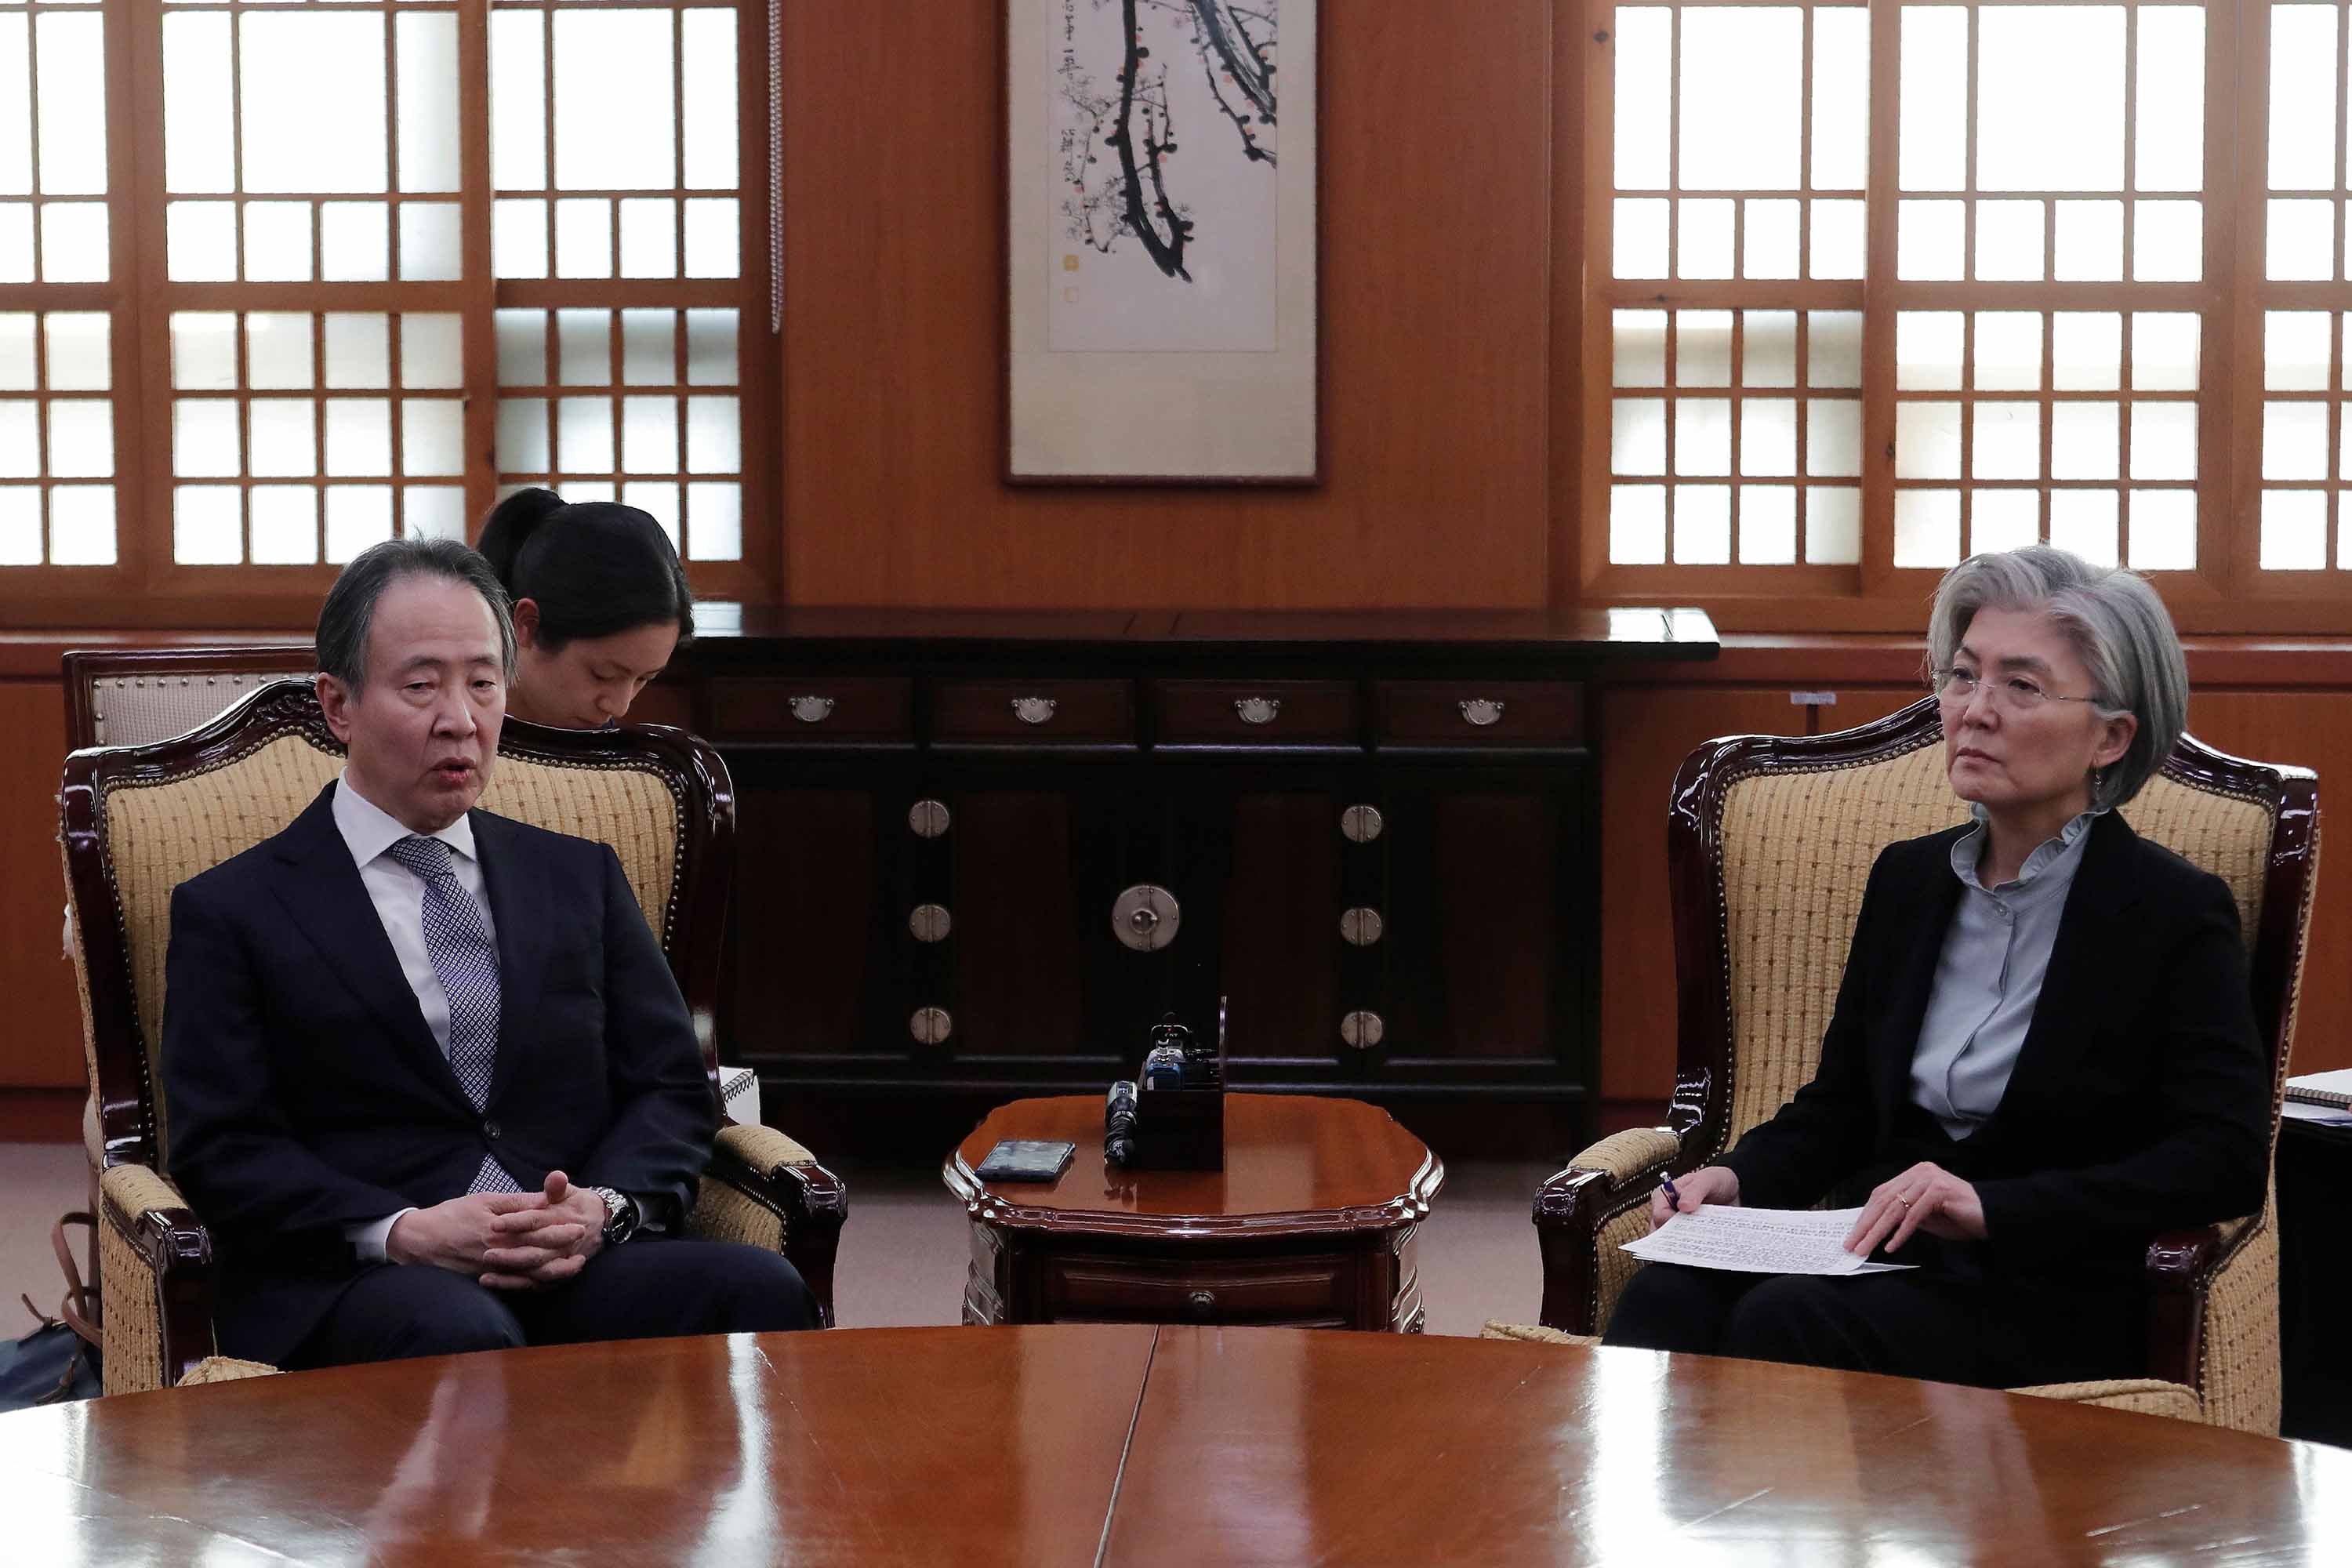 Japan's ambassador to South Korea Koji Tomita, left, meets with South Korea's Foreign Minister Kang Kyung-wha at the foreign ministry in Seoul, South Korea, on Friday.